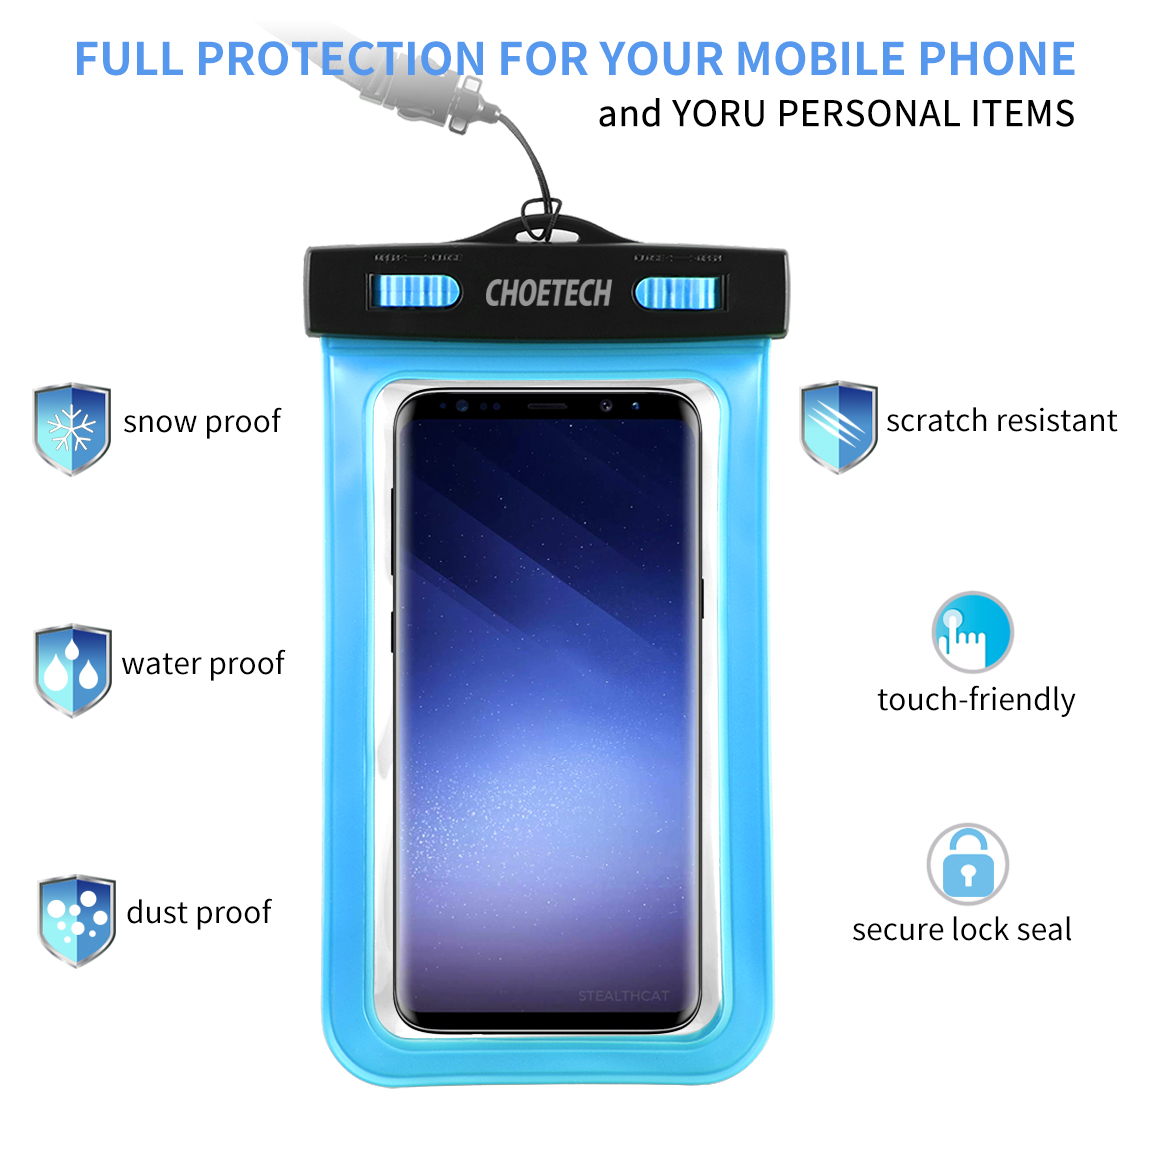 CHOETECH-Swimming-Diving-PVC-Touch-Screen-Clear-IPX8-Waterproof-Phone-Bag-Phone-Pouch-with-Strap-for-1679568-2